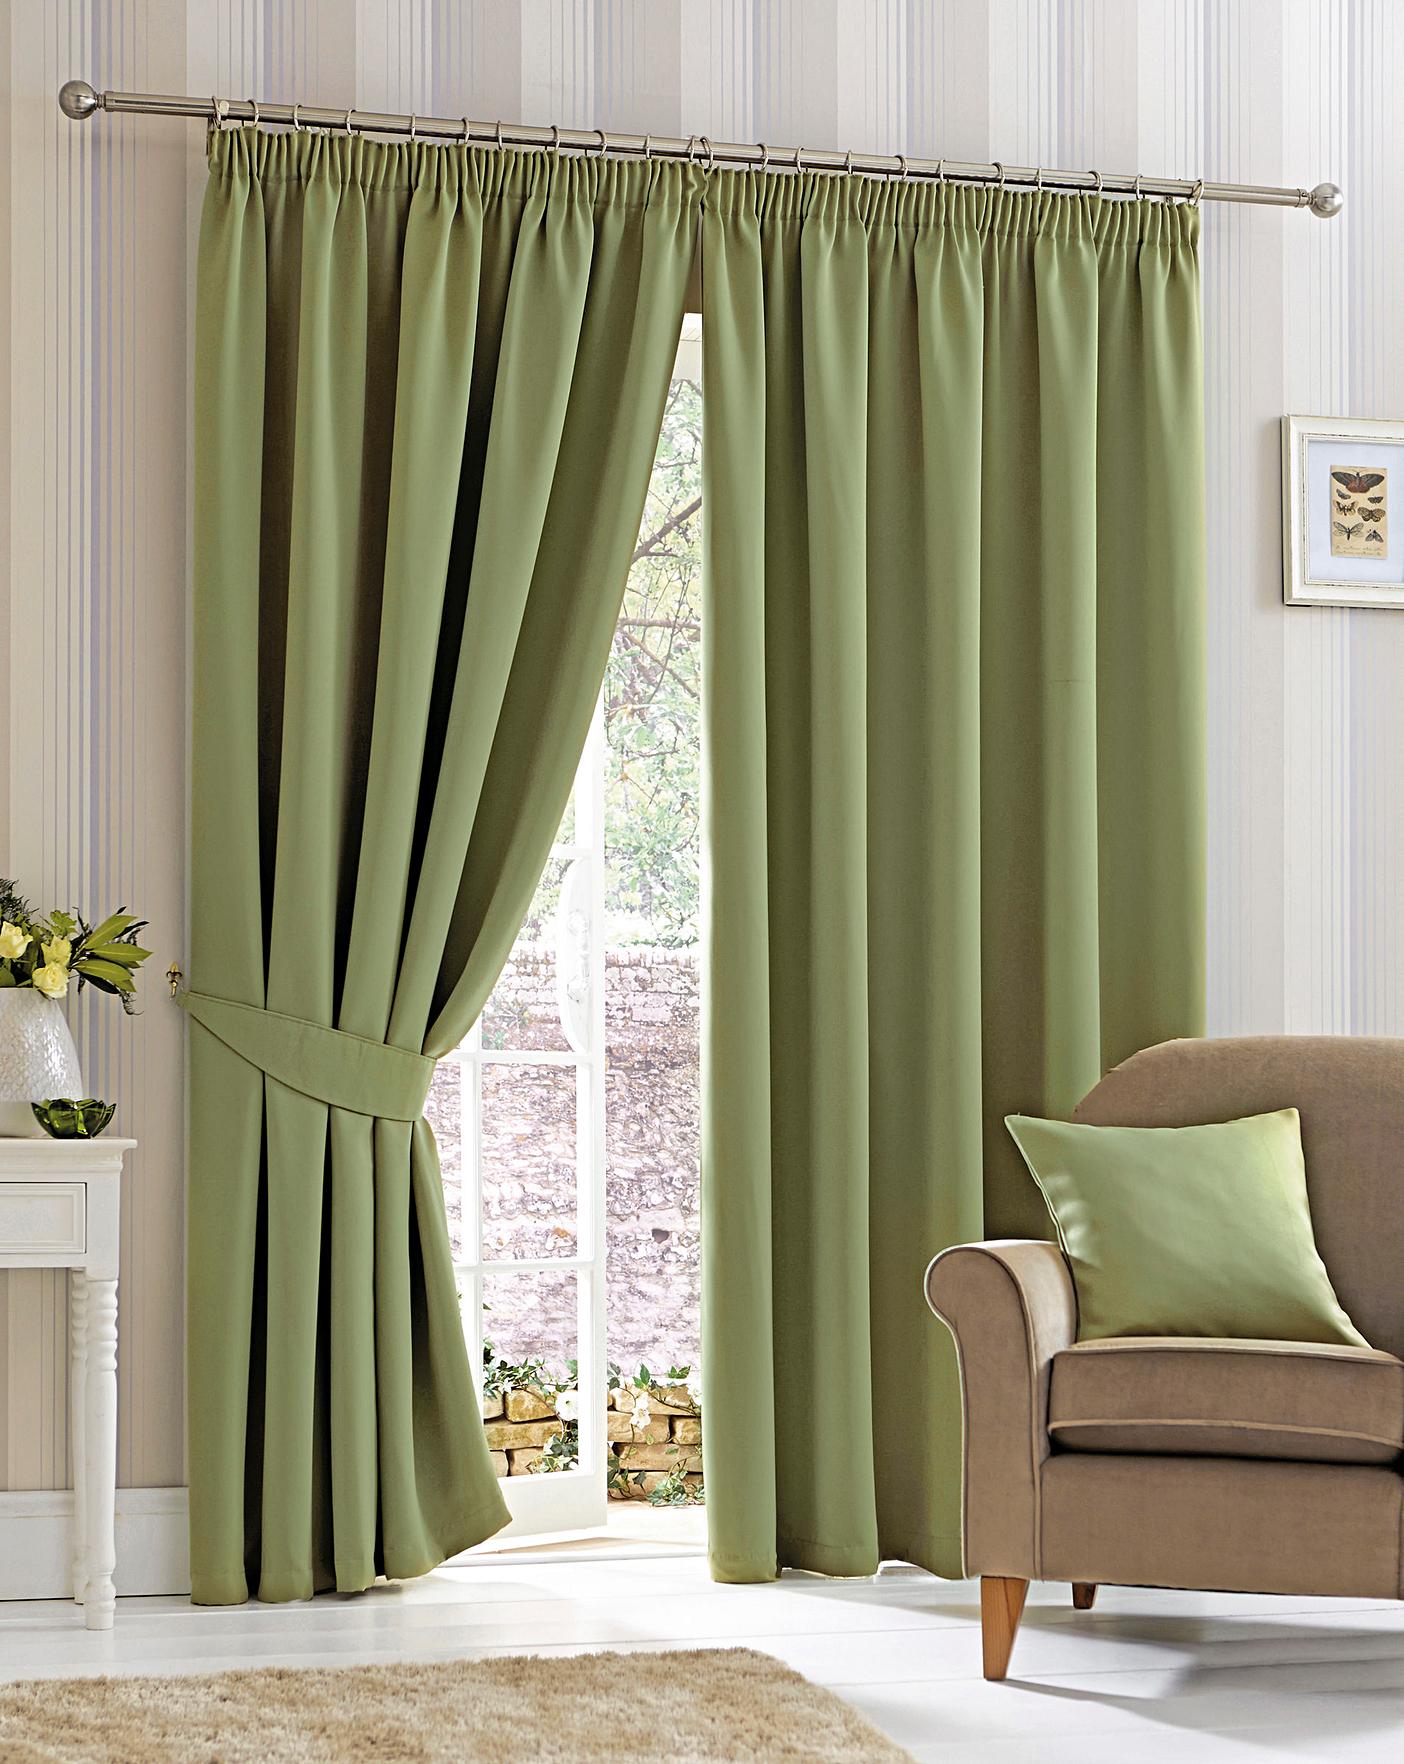 Woven Blackout Thermal Curtains | J D Williams